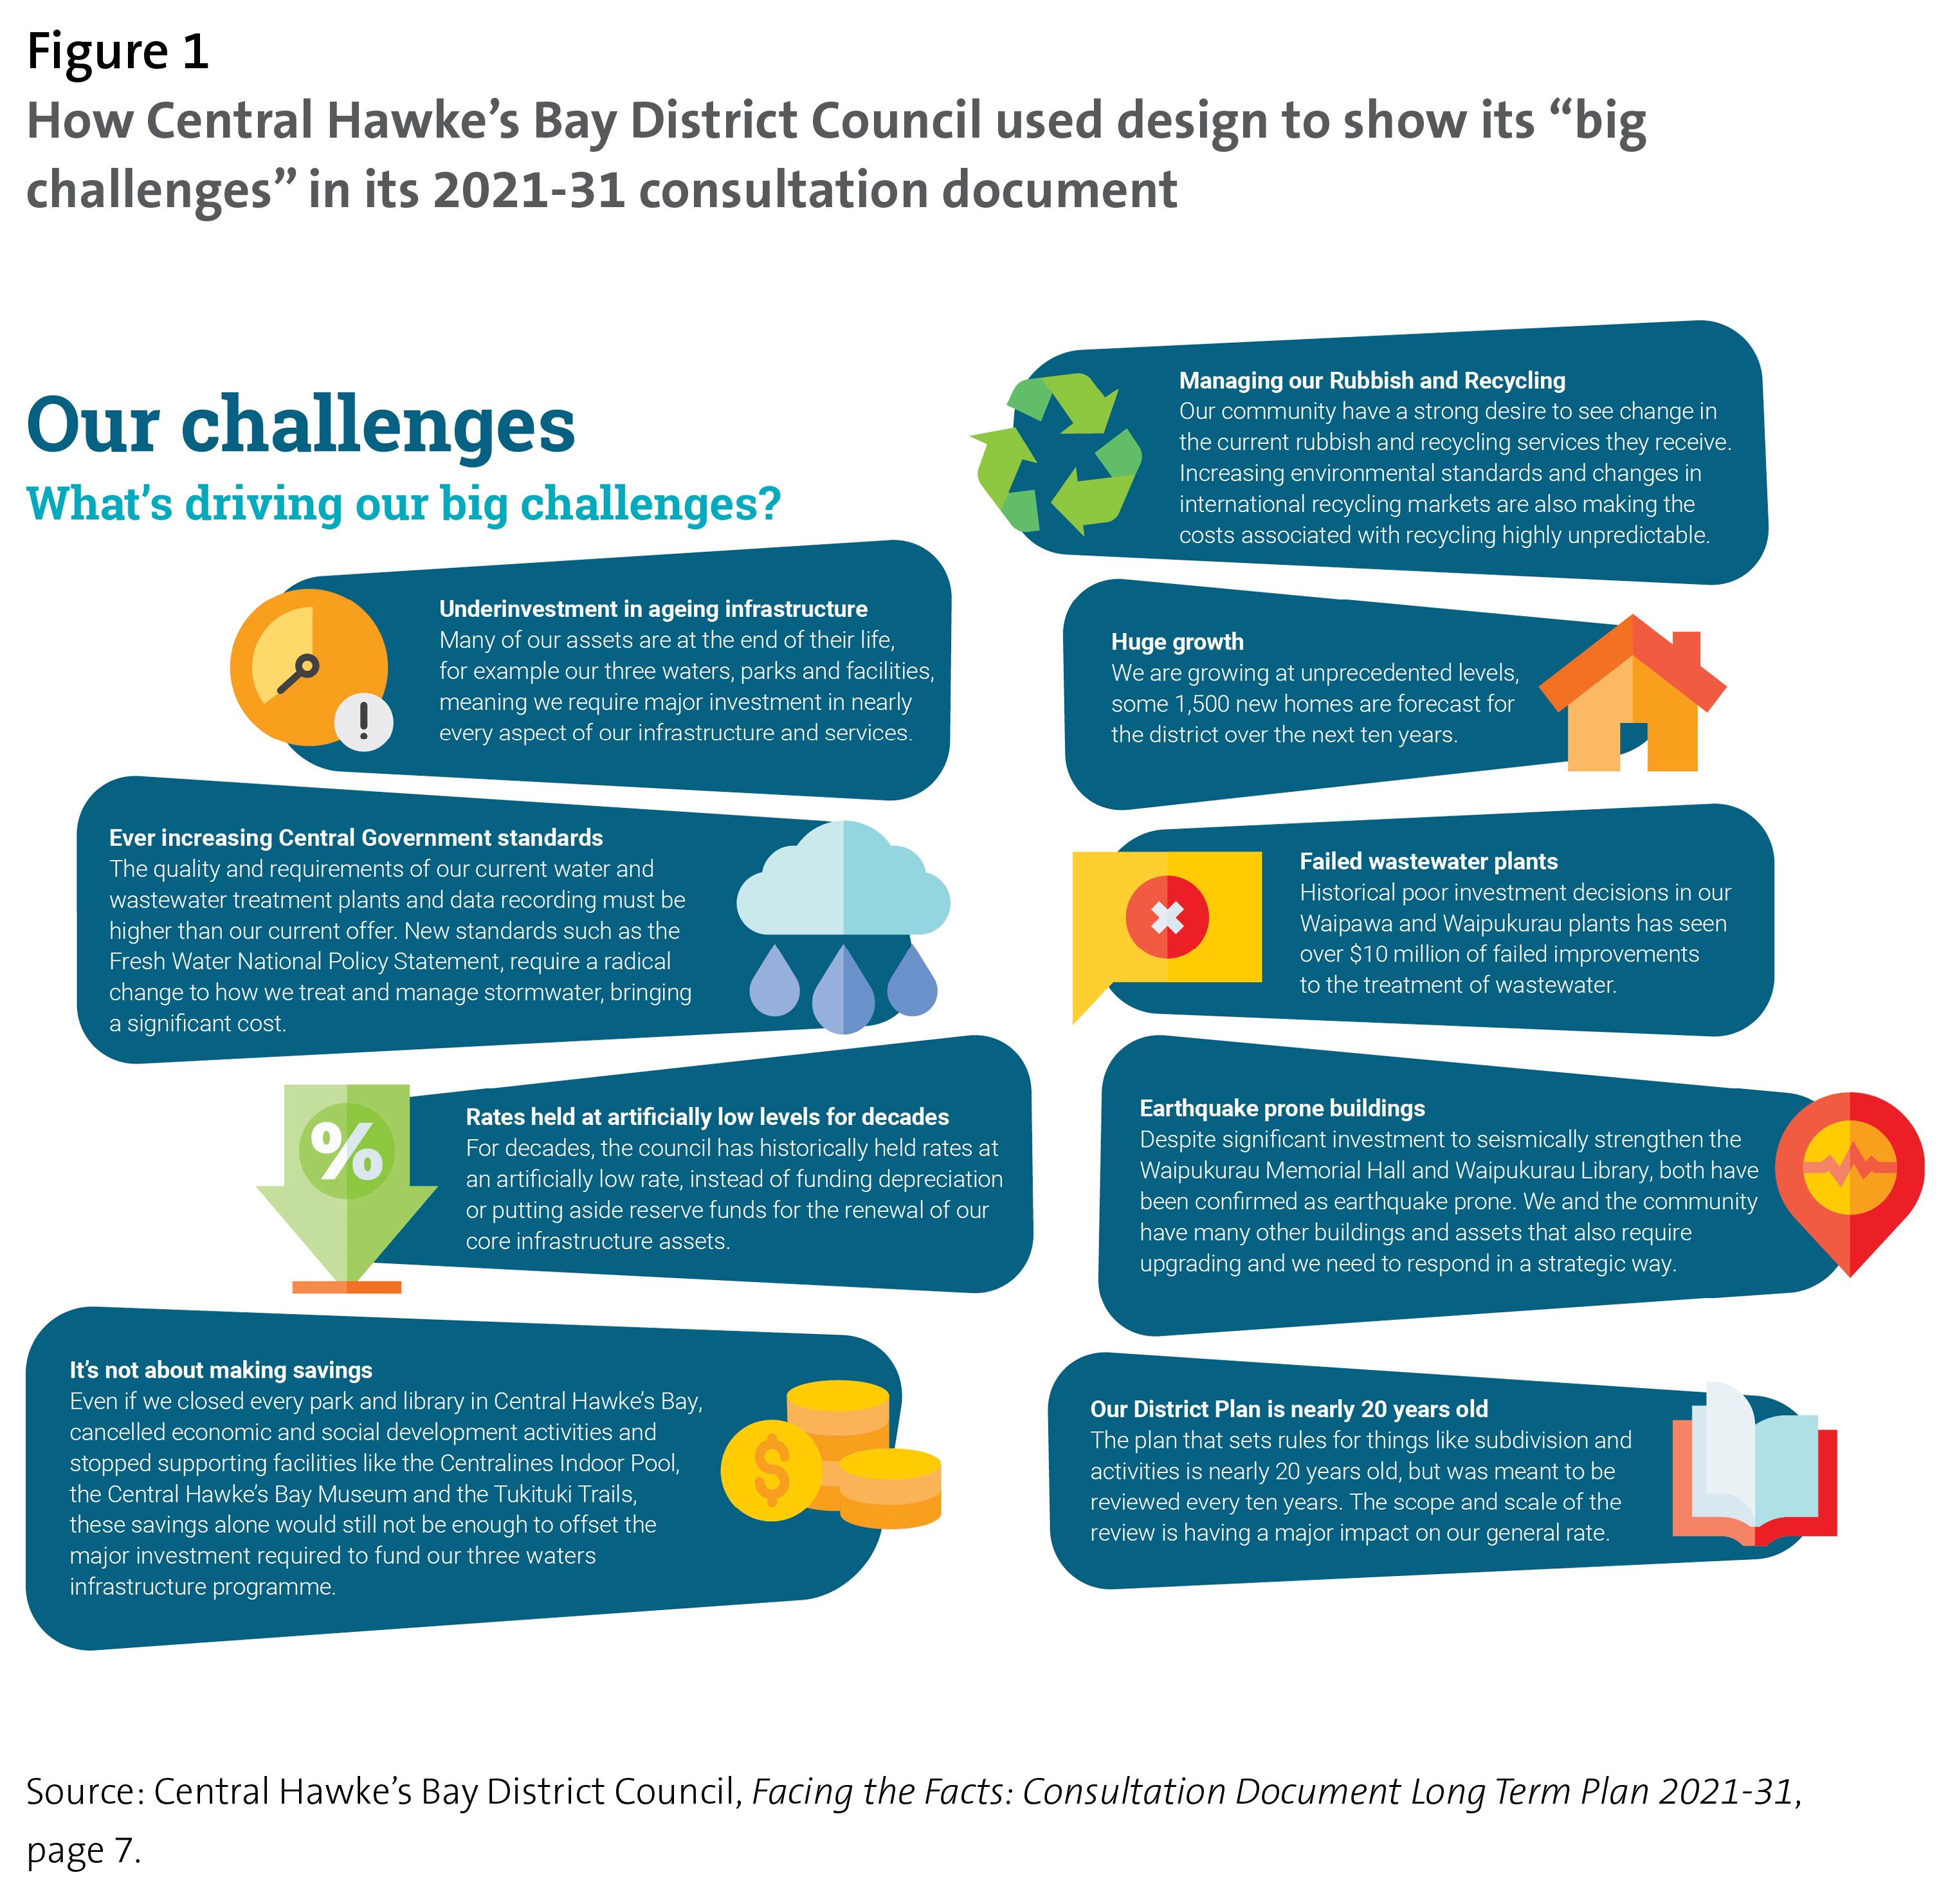 Figure 1 How Central Hawke’s Bay District Council used design to show its “big challenges” in its 2021-31 consultation document